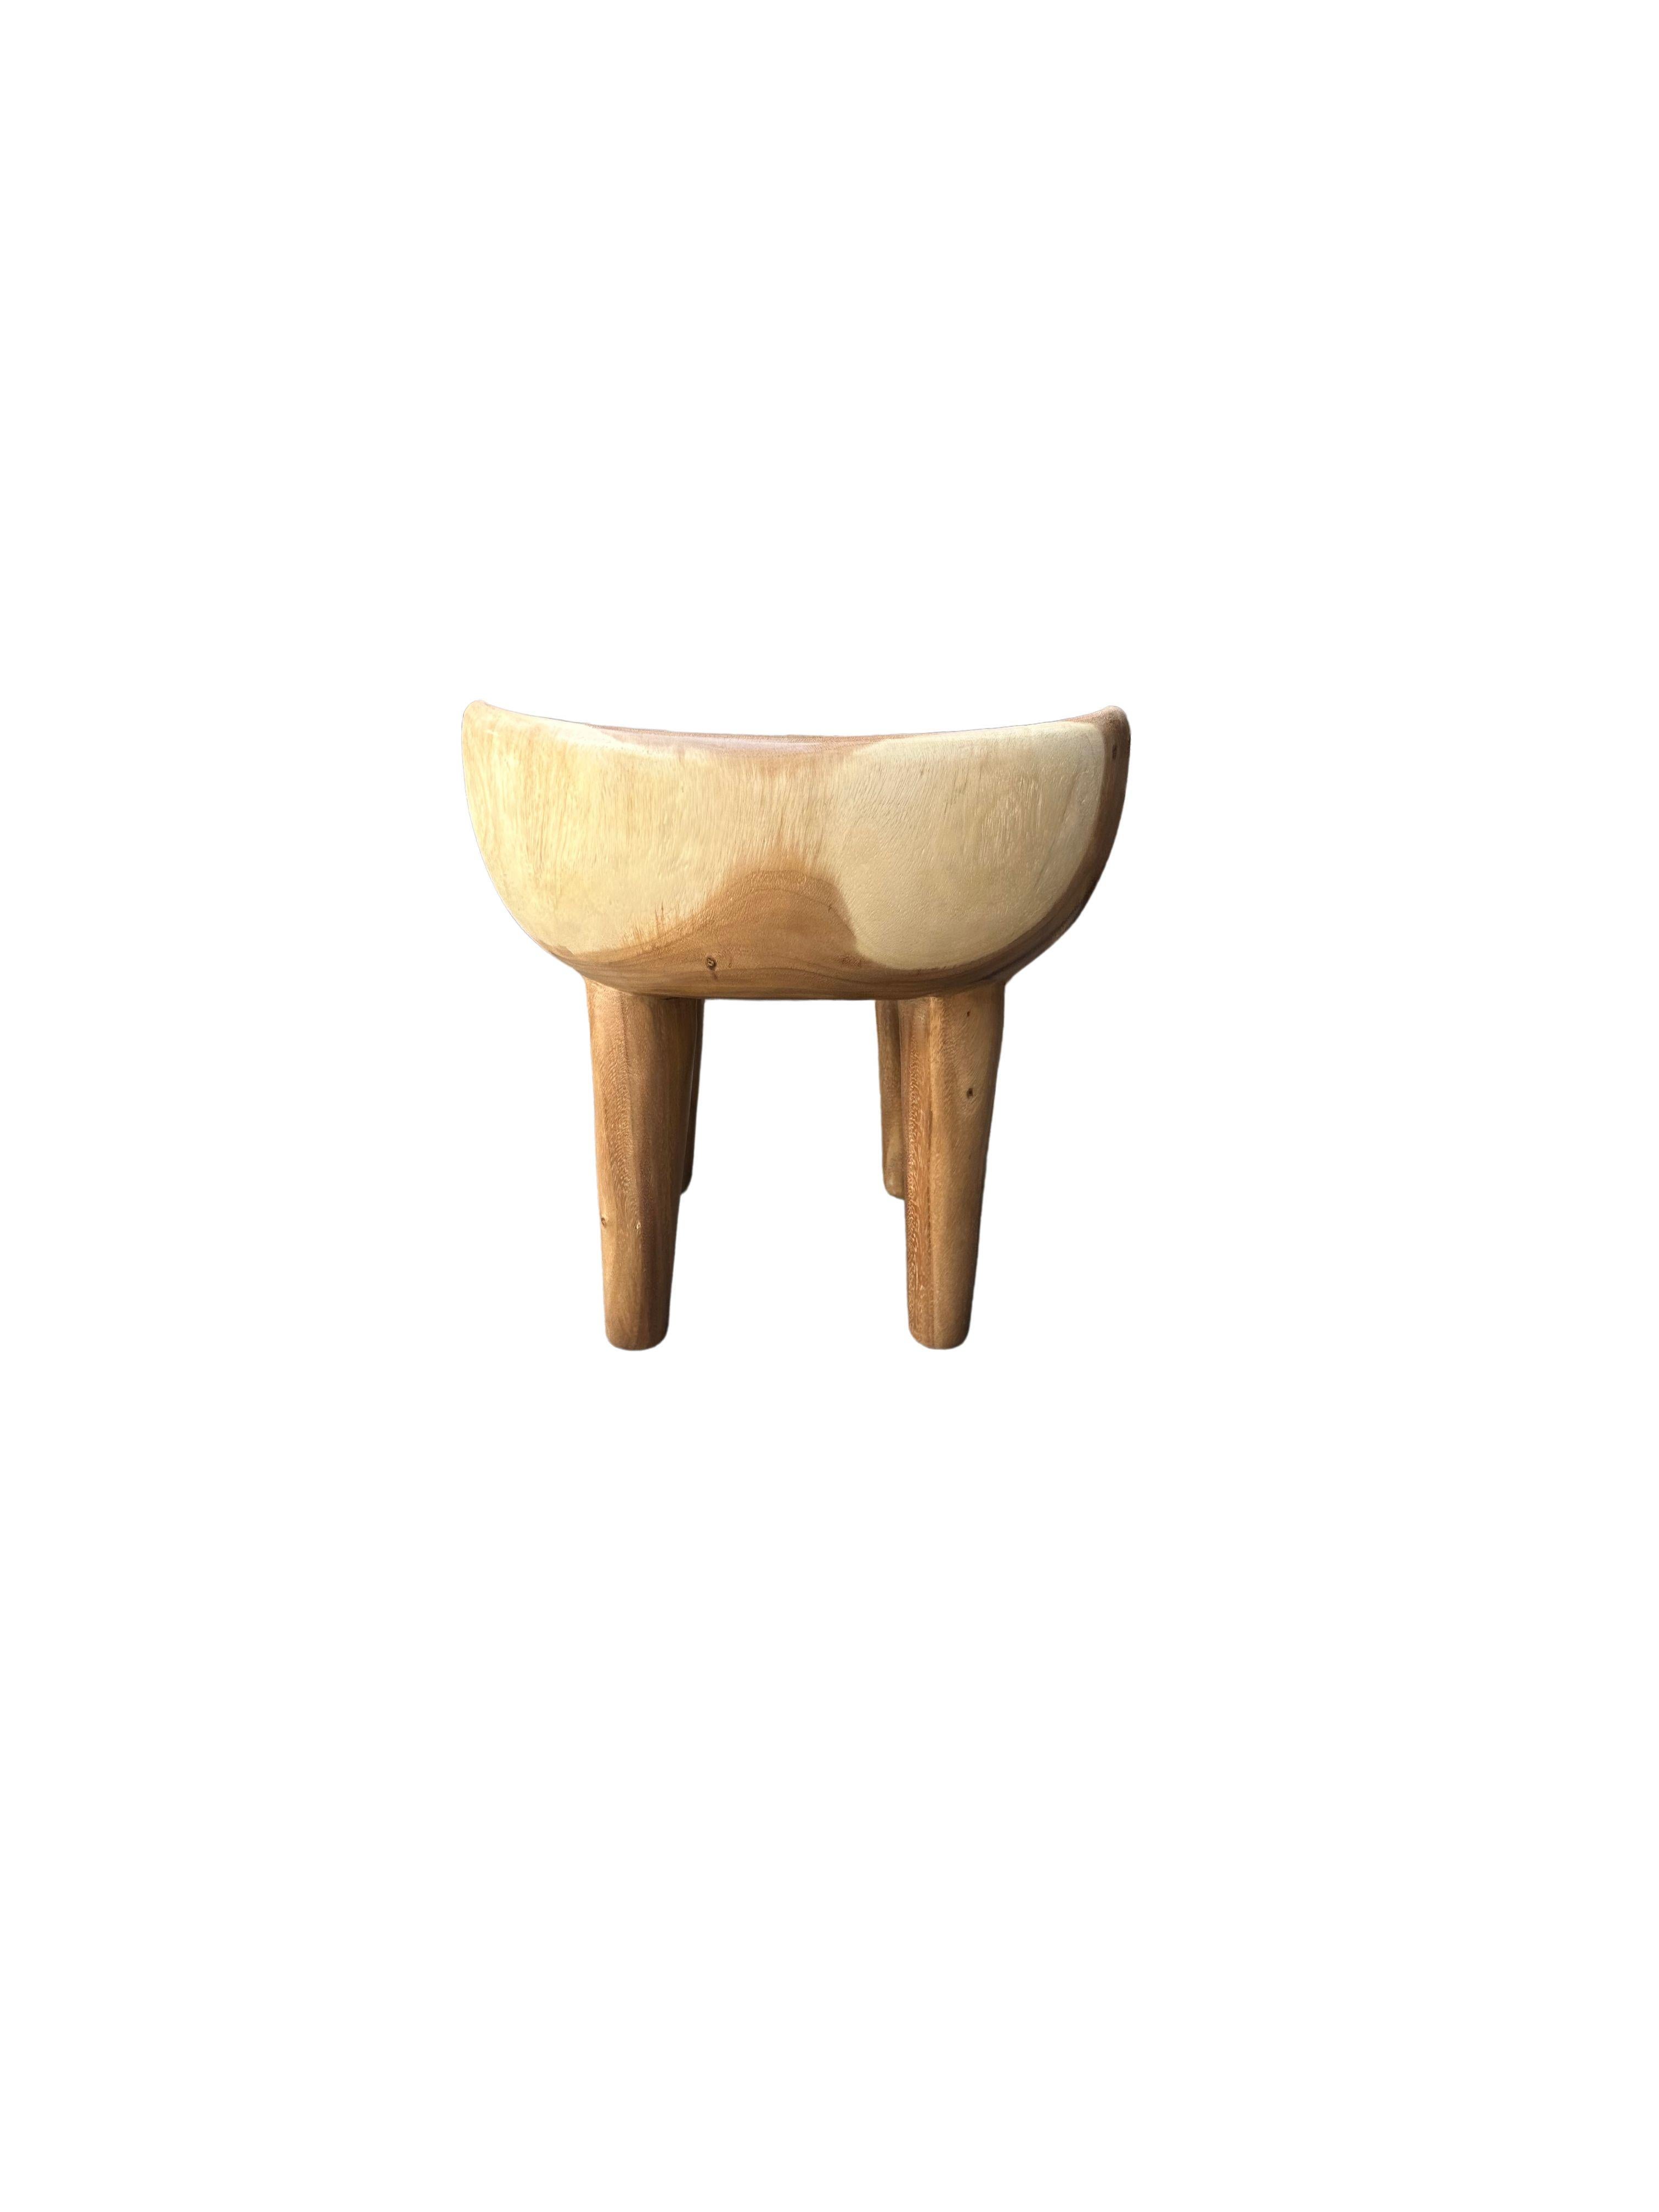 Sculptural Suar Wood Chair Modern Organic In New Condition For Sale In Jimbaran, Bali